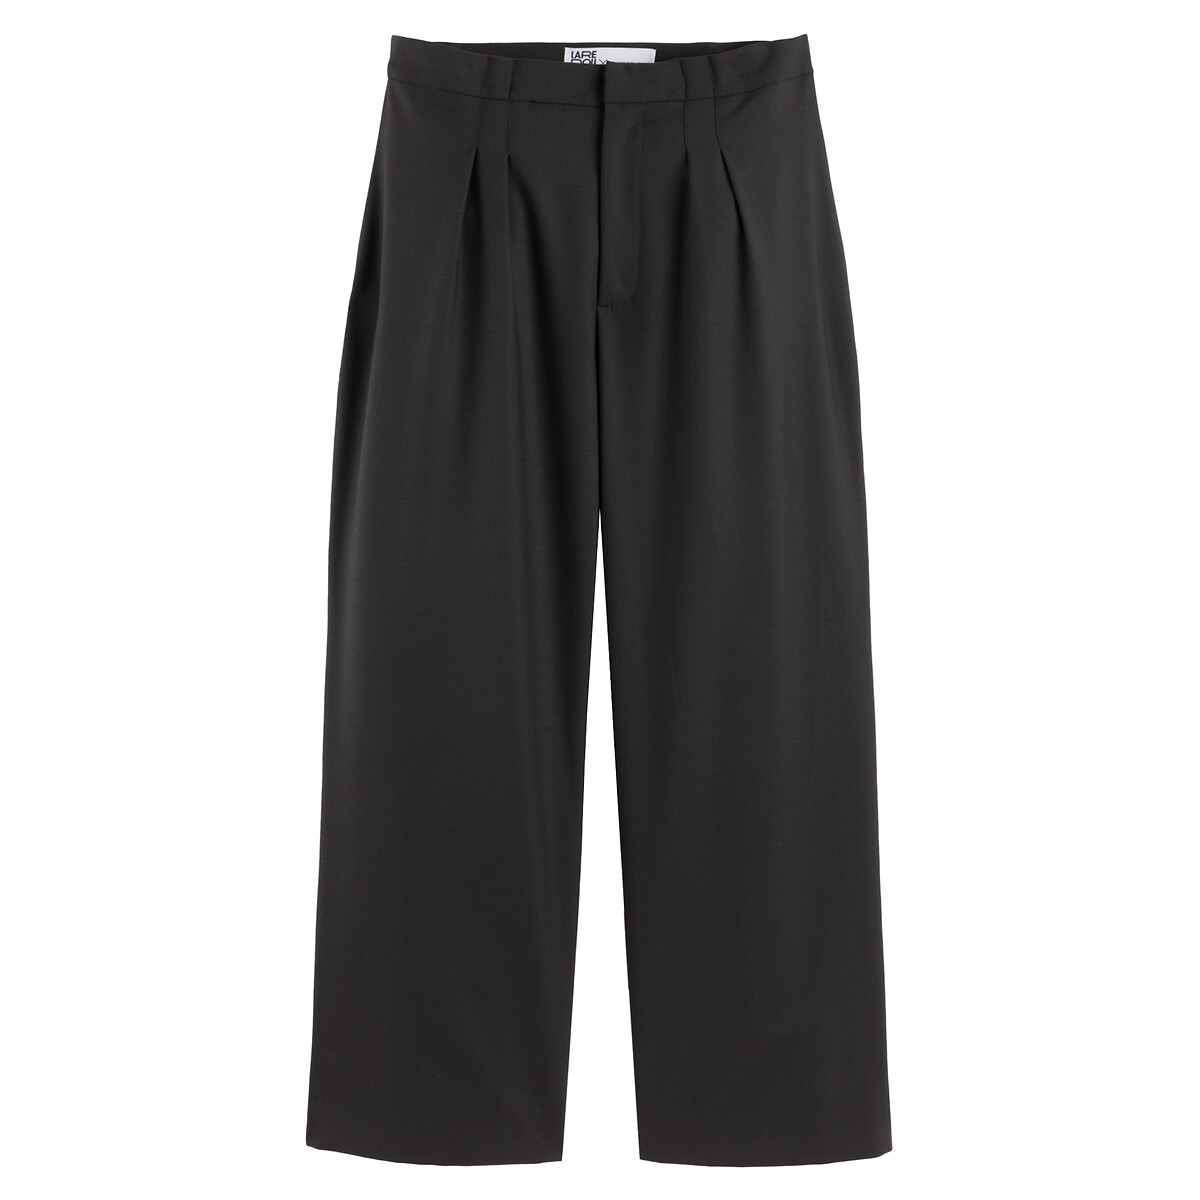 Loose Fit Trousers with Pleat Front, Length 29.5"